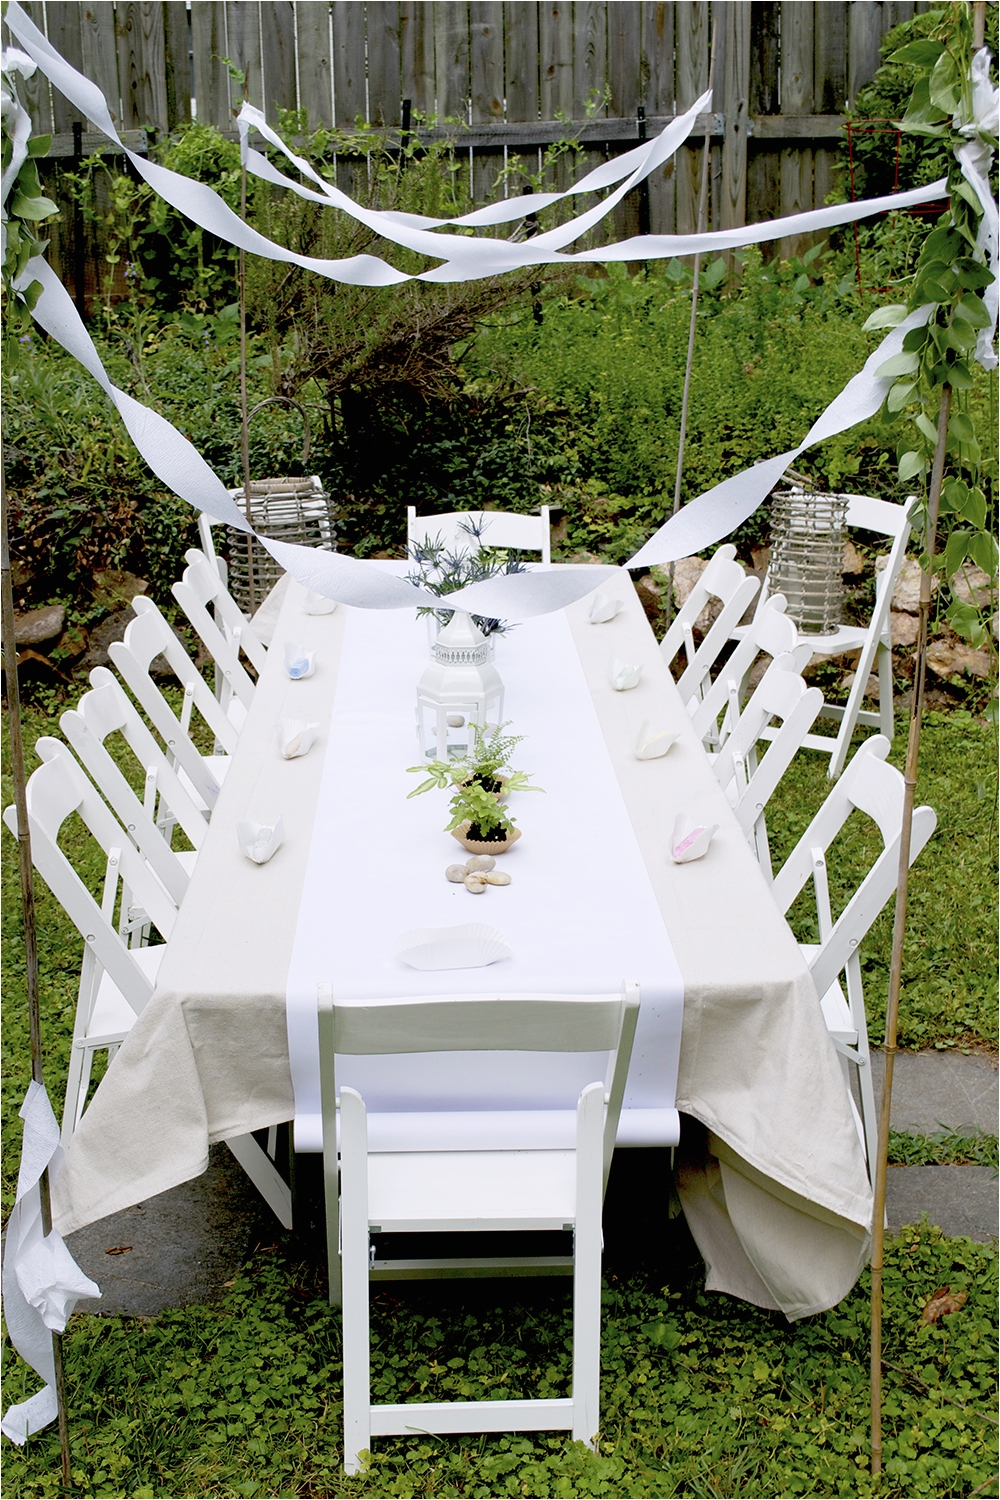 Kid Table and Chair Rentals Near Me Modern Kids Table Ideas for Party